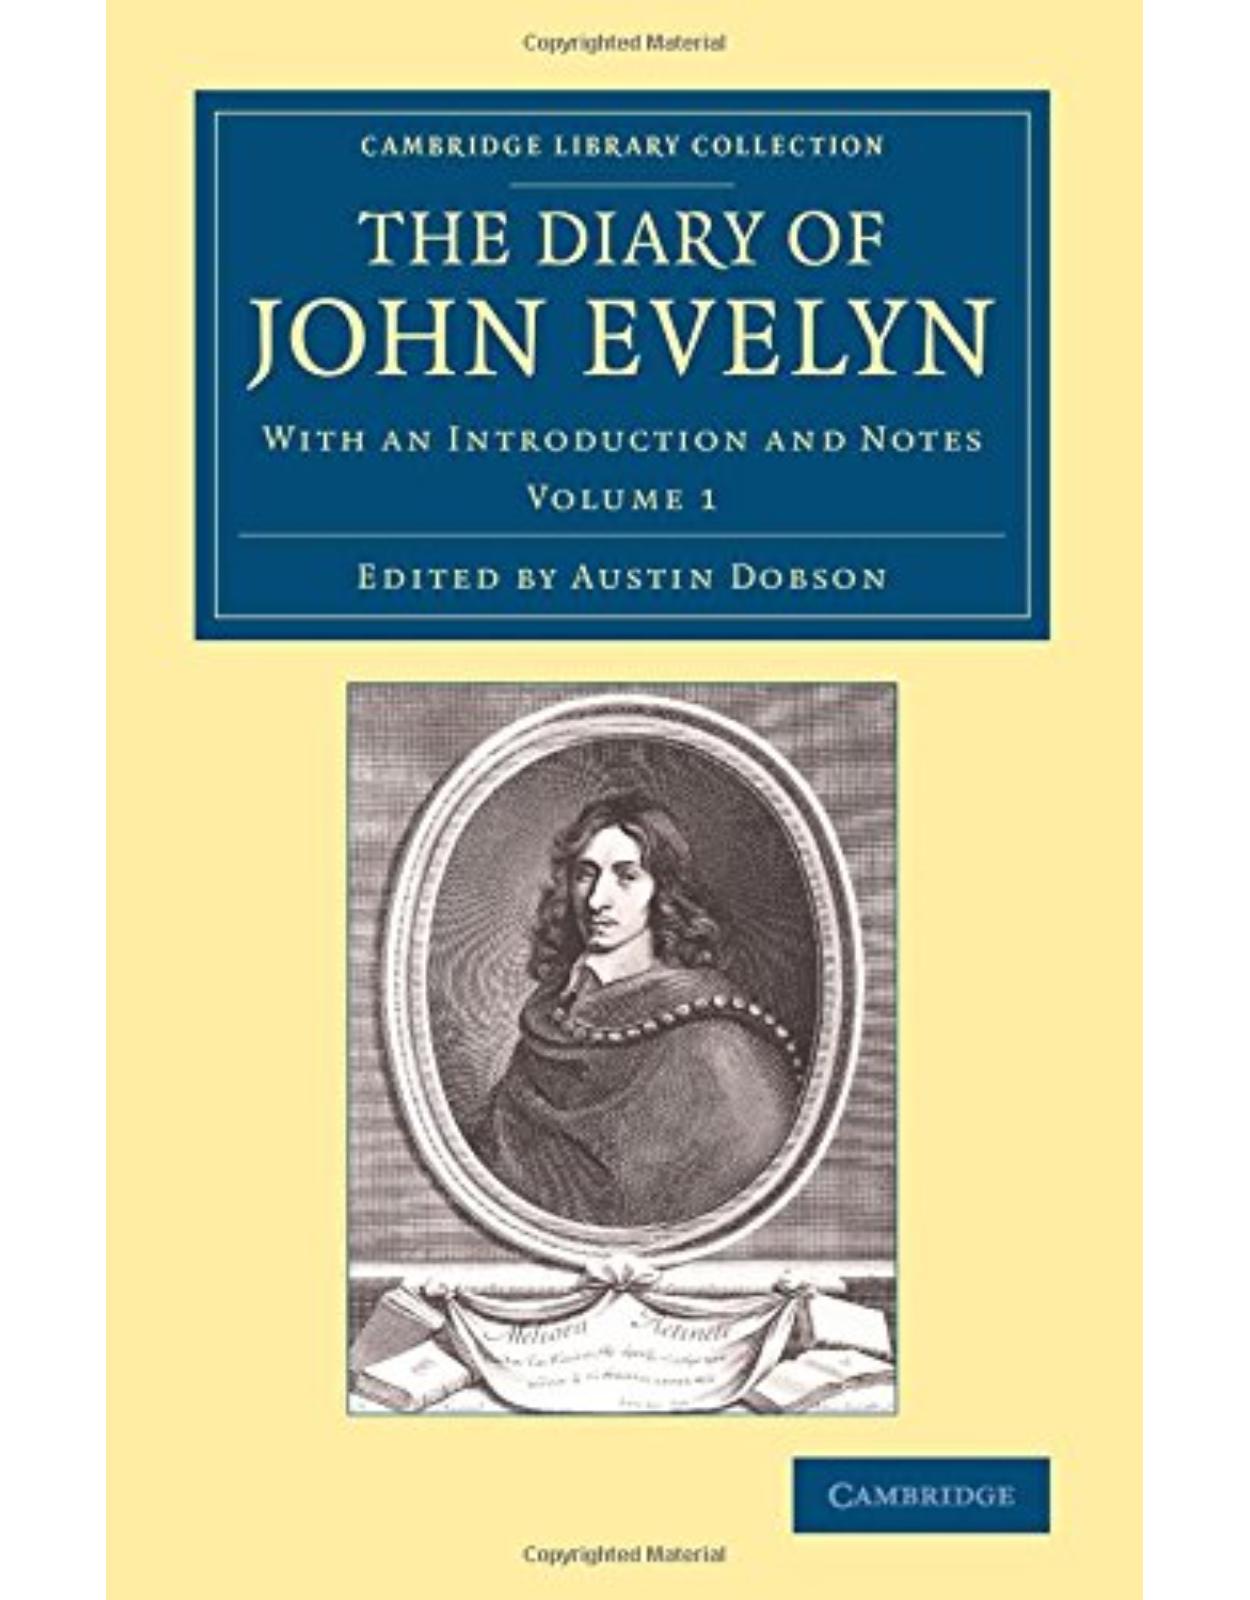 The Diary of John Evelyn 3 Volume Set: The Diary of John Evelyn: With an Introduction and Notes: Volume 1 (Cambridge Library Collection - British & Irish History, 17th & 18th Centuries)